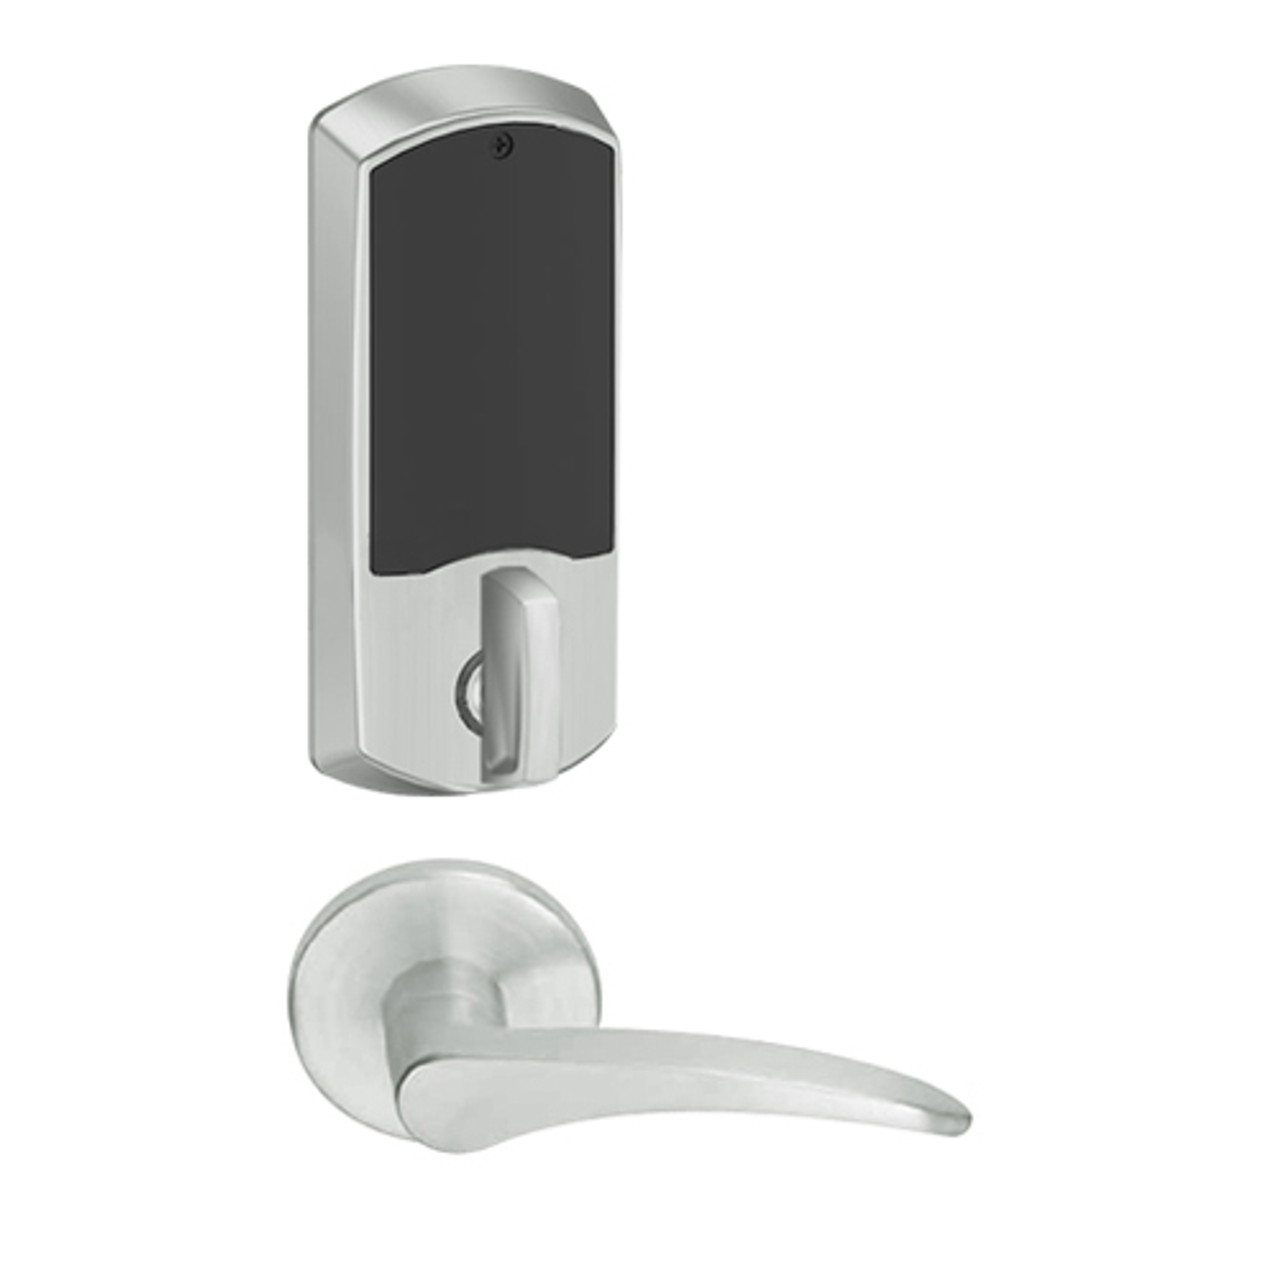 LEMD-GRW-BD-12-619-00A-LH Schlage Privacy/Apartment Wireless Greenwich Mortise Deadbolt Lock with LED and 12 Lever Prepped for SFIC in Satin Nickel